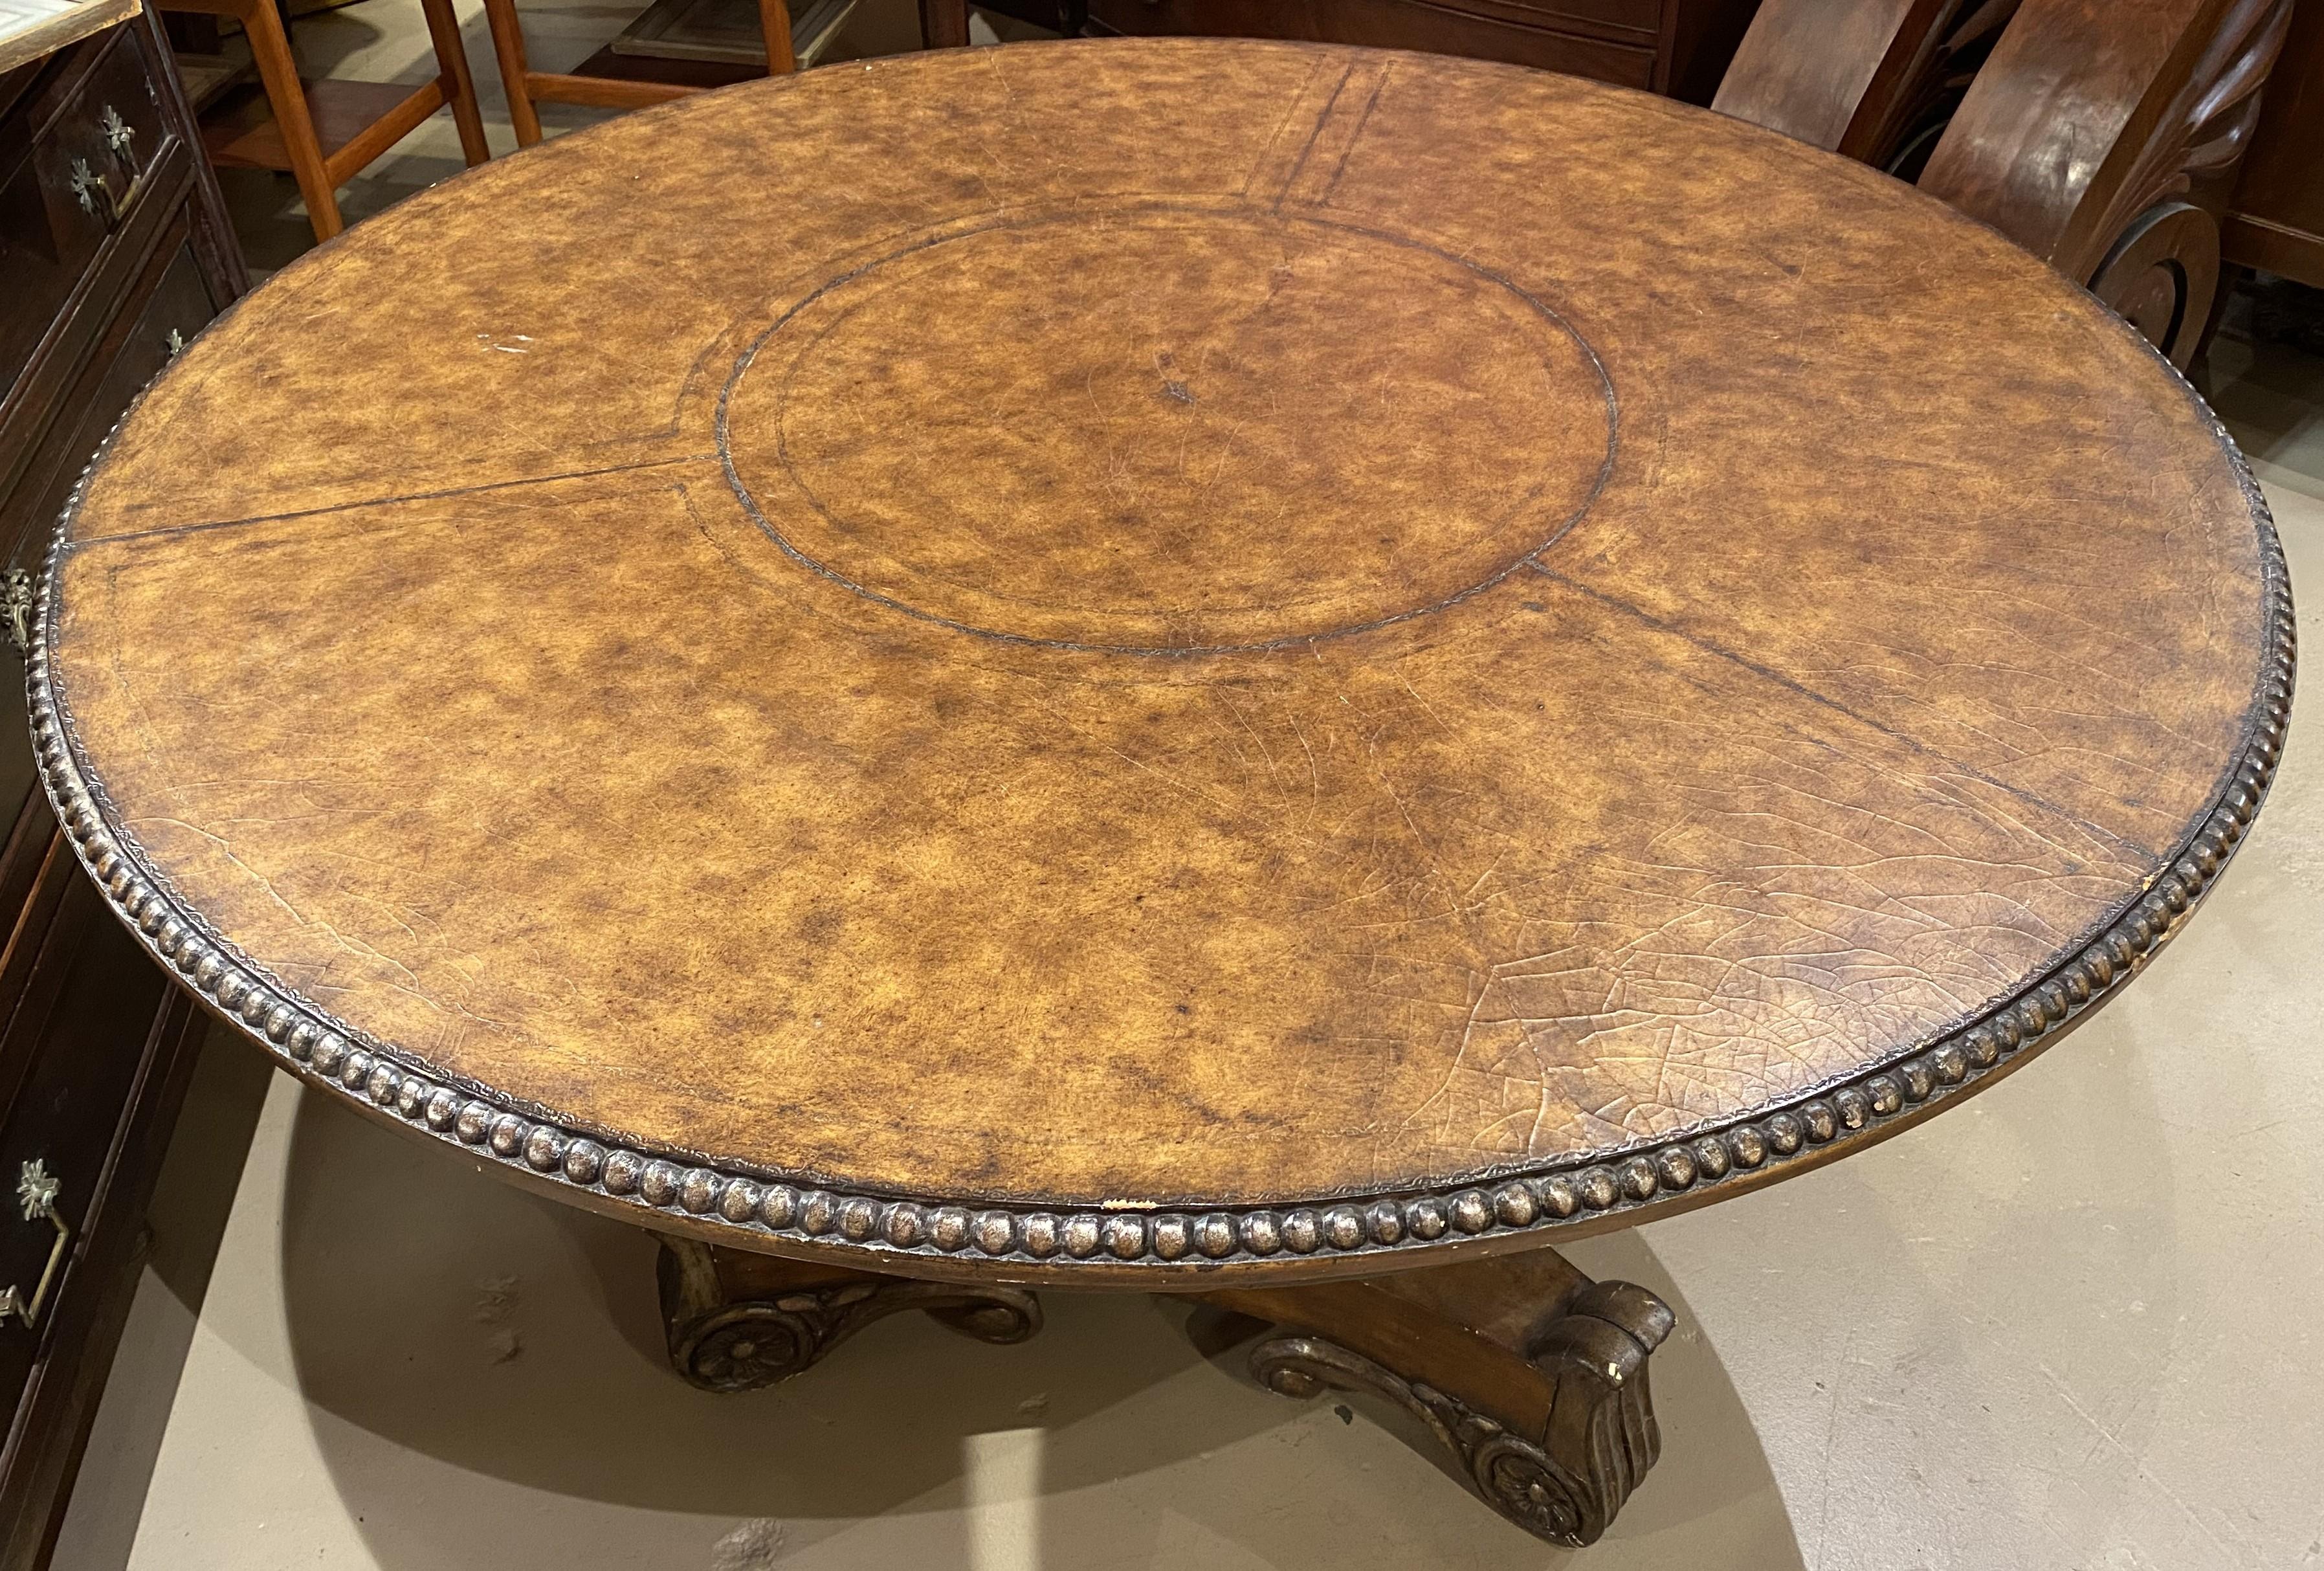 A nice example of a walnut polychromed round center table with leather top in a craquelure finish with beaded edge in the classical form, with center round pedestal supported by three scroll carved feet. Probably English in origin, dating to the